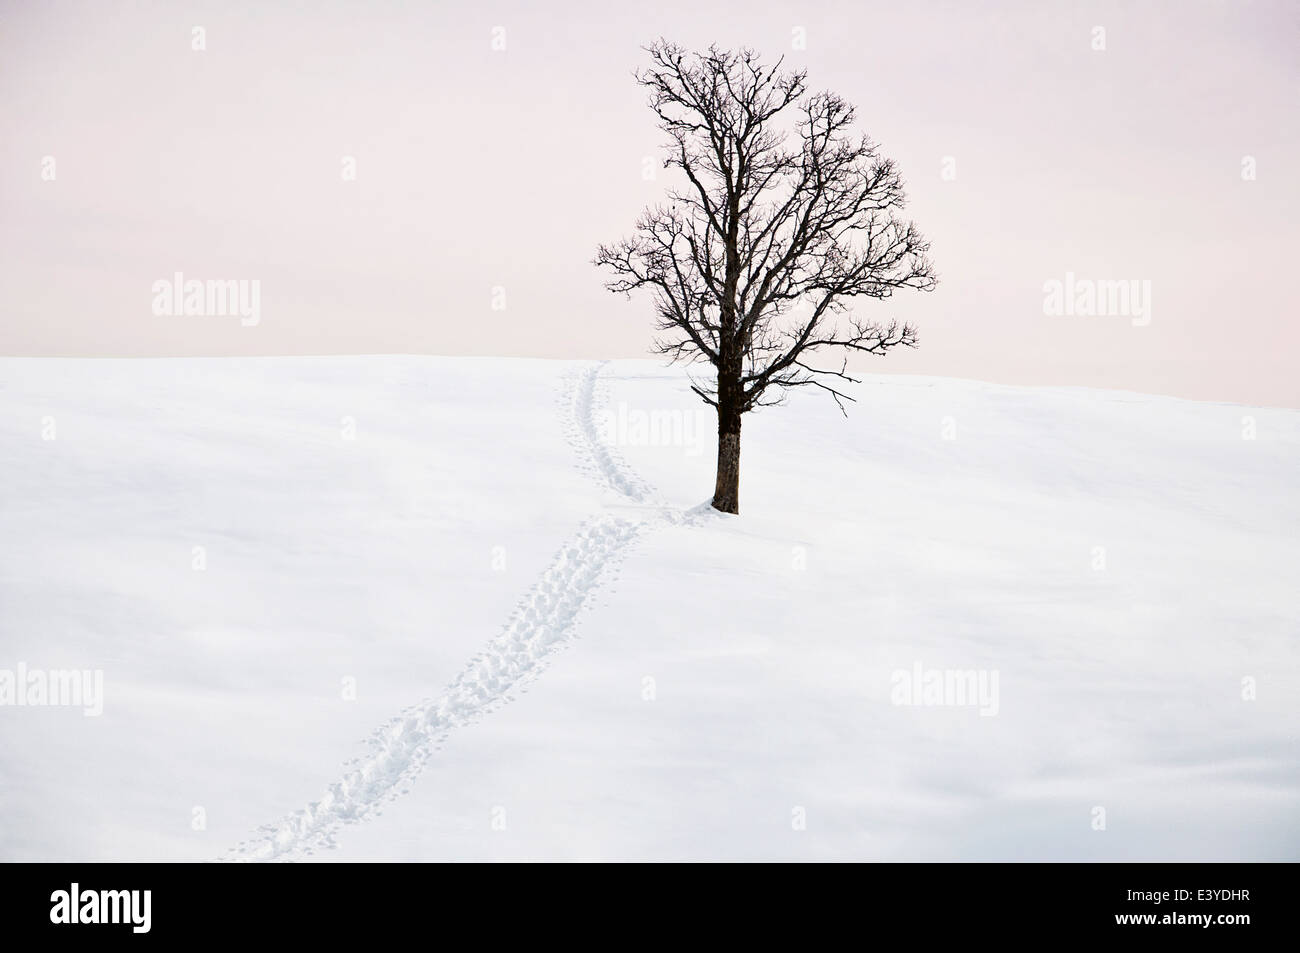 Single bald tree in winter with footsteps in the snow Stock Photo